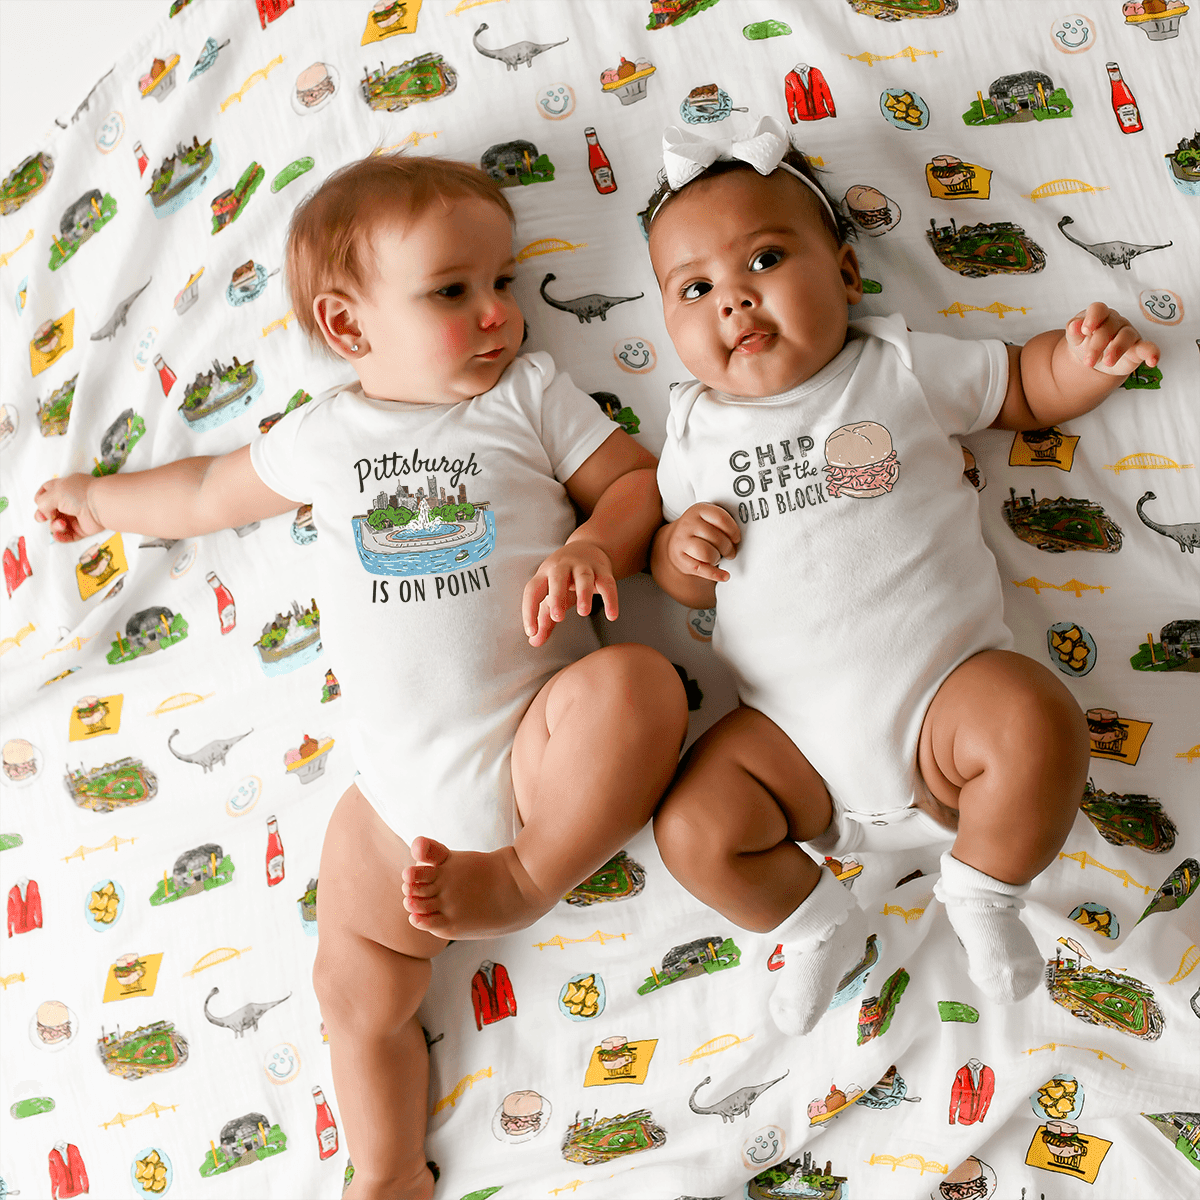 Baby onesie with "Pittsburgh is on point" text, featuring a yellow pencil graphic on a white background.